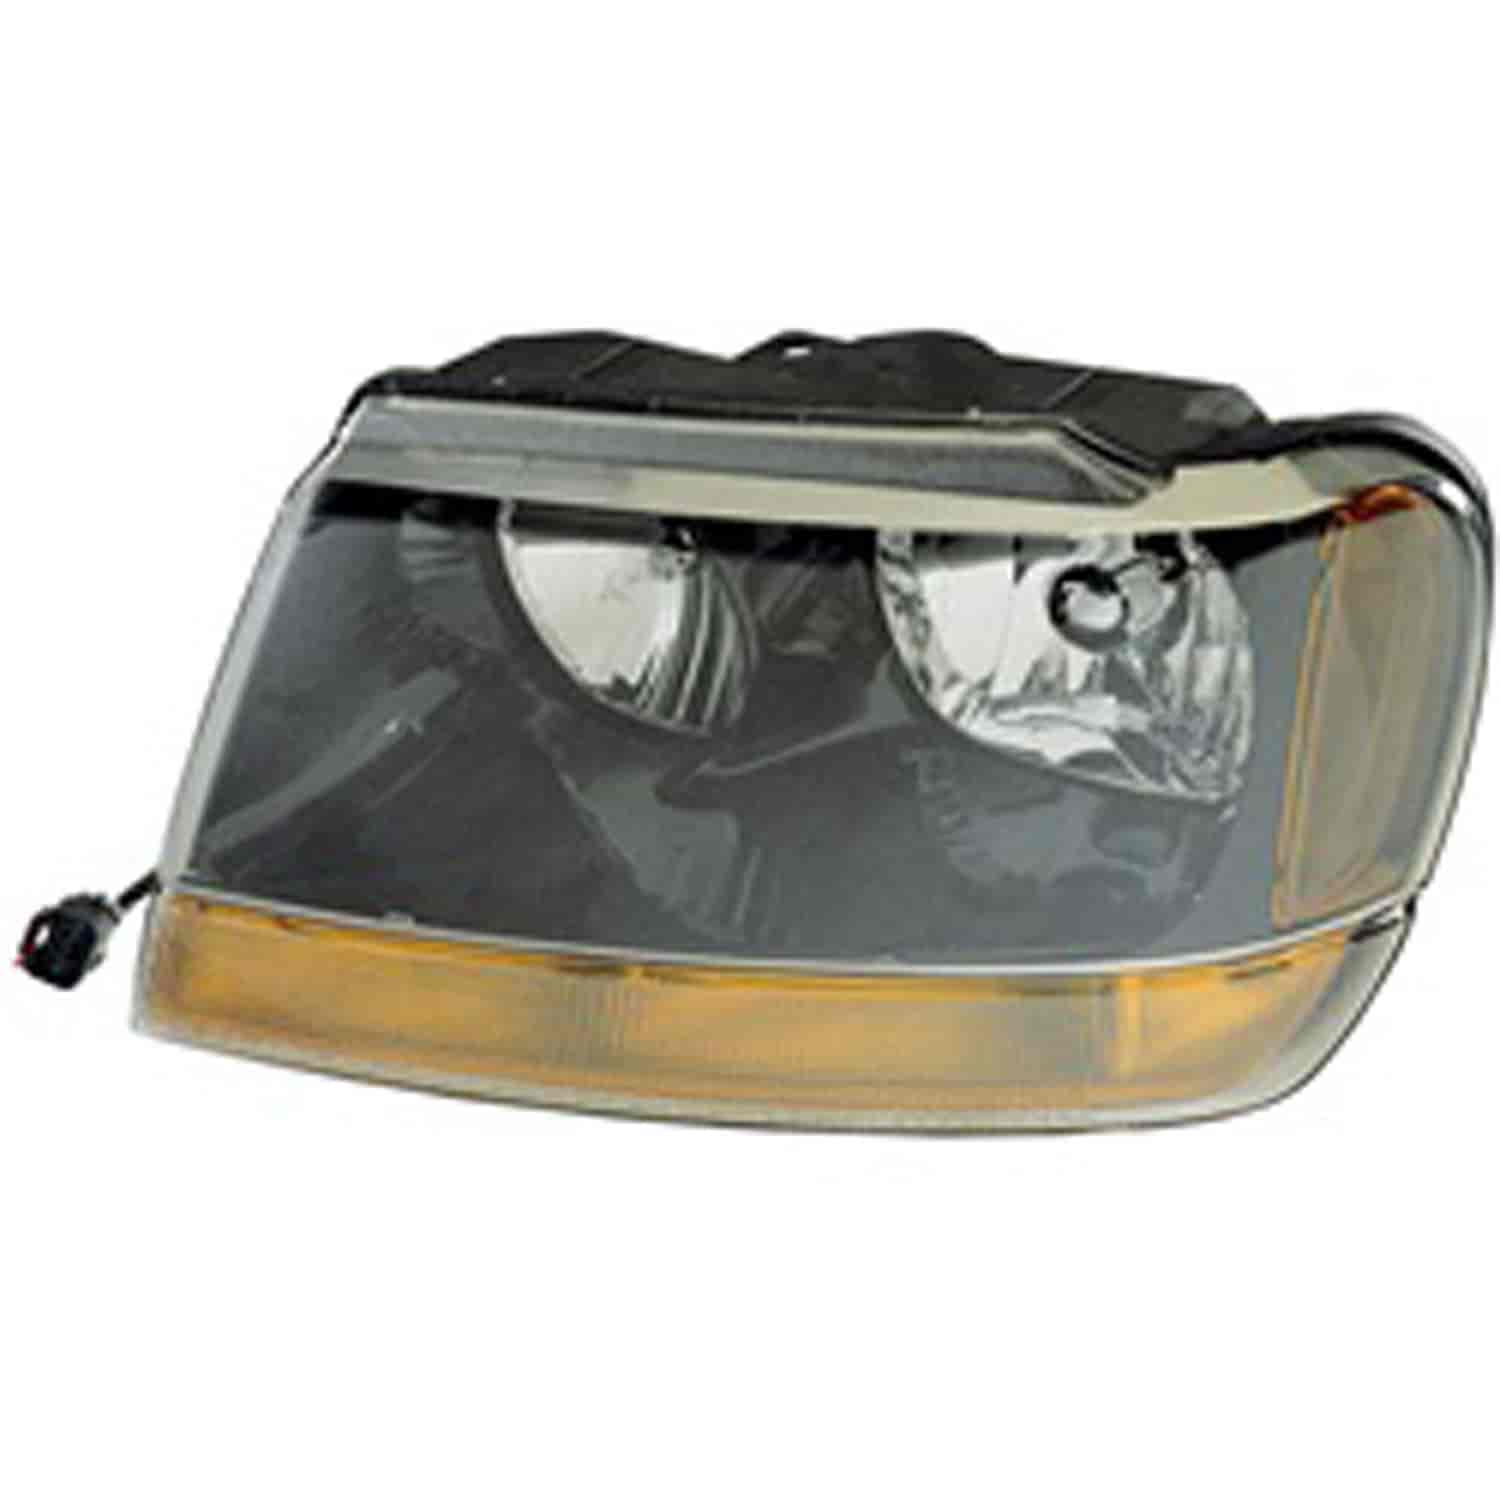 Replacement headlight assembly from Omix-ADA, Fits left side on 99-04 Jeep Grand Cherokee WJ Laredo.